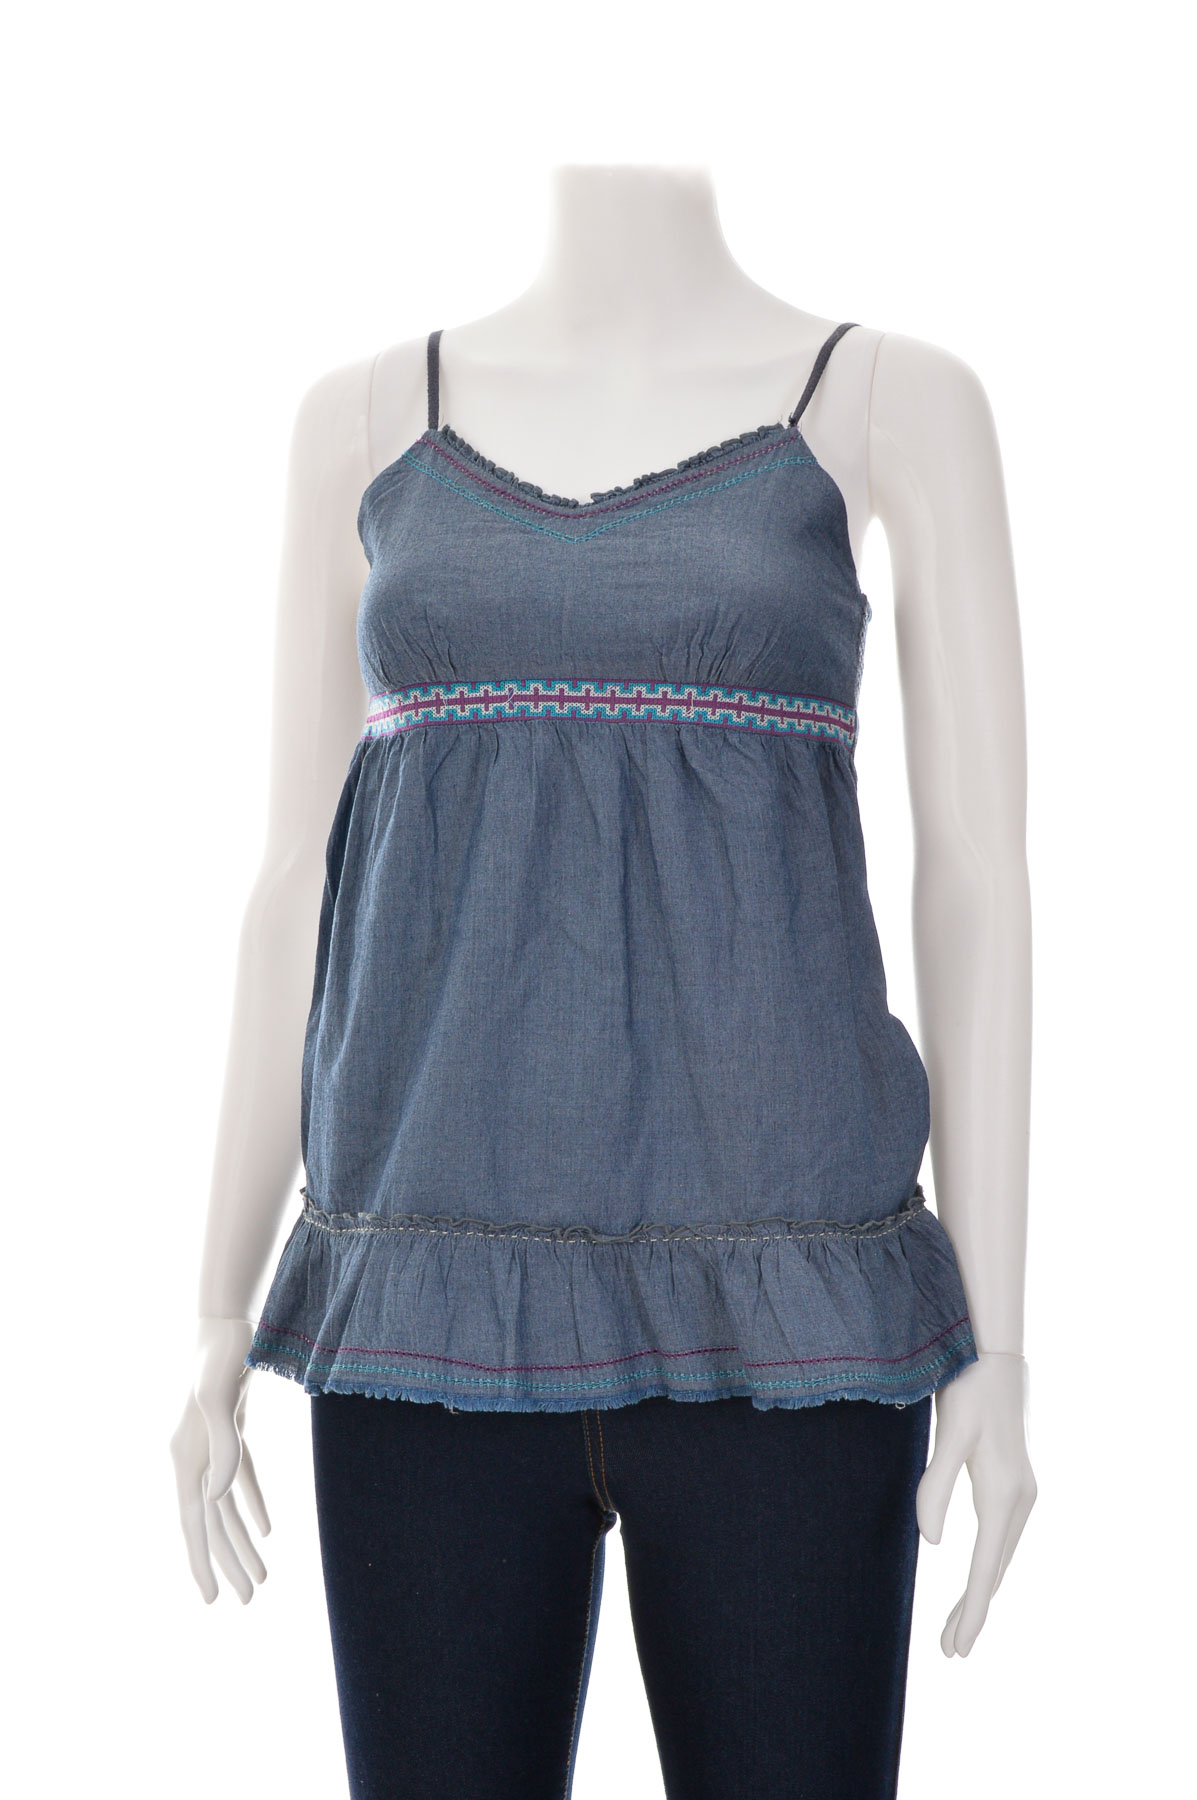 Women's top - Mossimo Suply Co - 0